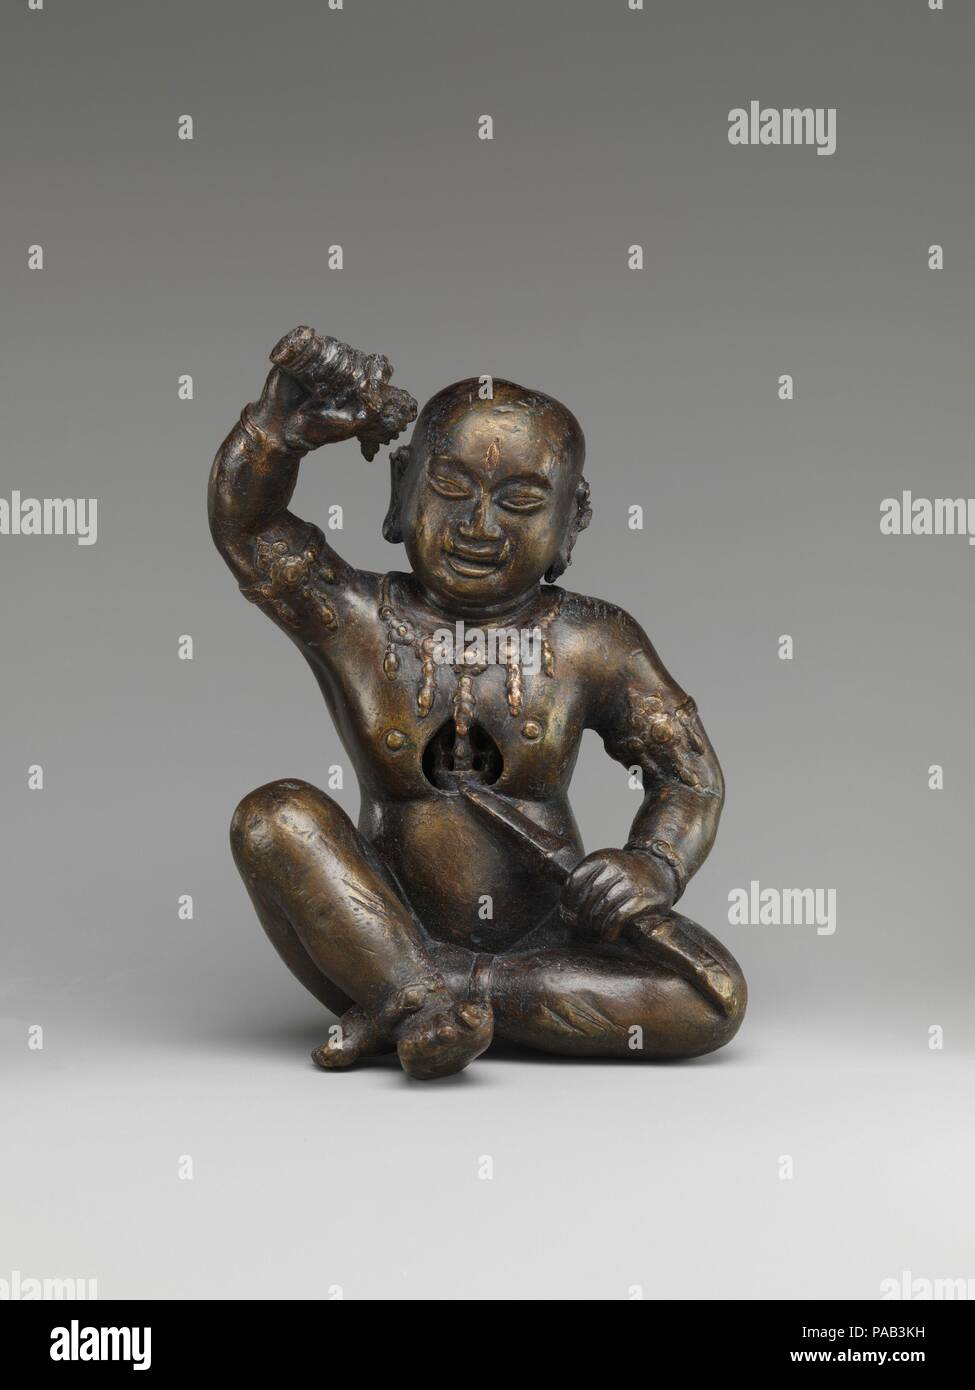 Esoteric Buddhist Personage. Culture: Nepal (Kathmandu Valley). Dimensions: H. 6 3/8 in. (16.2 cm); W. 4 3/8 in. (11.1 cm). Date: 15th century.  This wrathful Tantric Buddhist personage, with a shaved head, a vertical third eye, and upward-pointing fangs, is unidentified. His jewelry derives from eastern Indian prototypes of the Pala period (9th-12th century). He points a single-pronged thunderbolt scepter (vajra) toward a heart-shaped cavity at the center of his chest, itself occupied by a multipronged vajra. In his raised hand he holds a sword pommel with a guard in the shape of a lion's hea Stock Photo